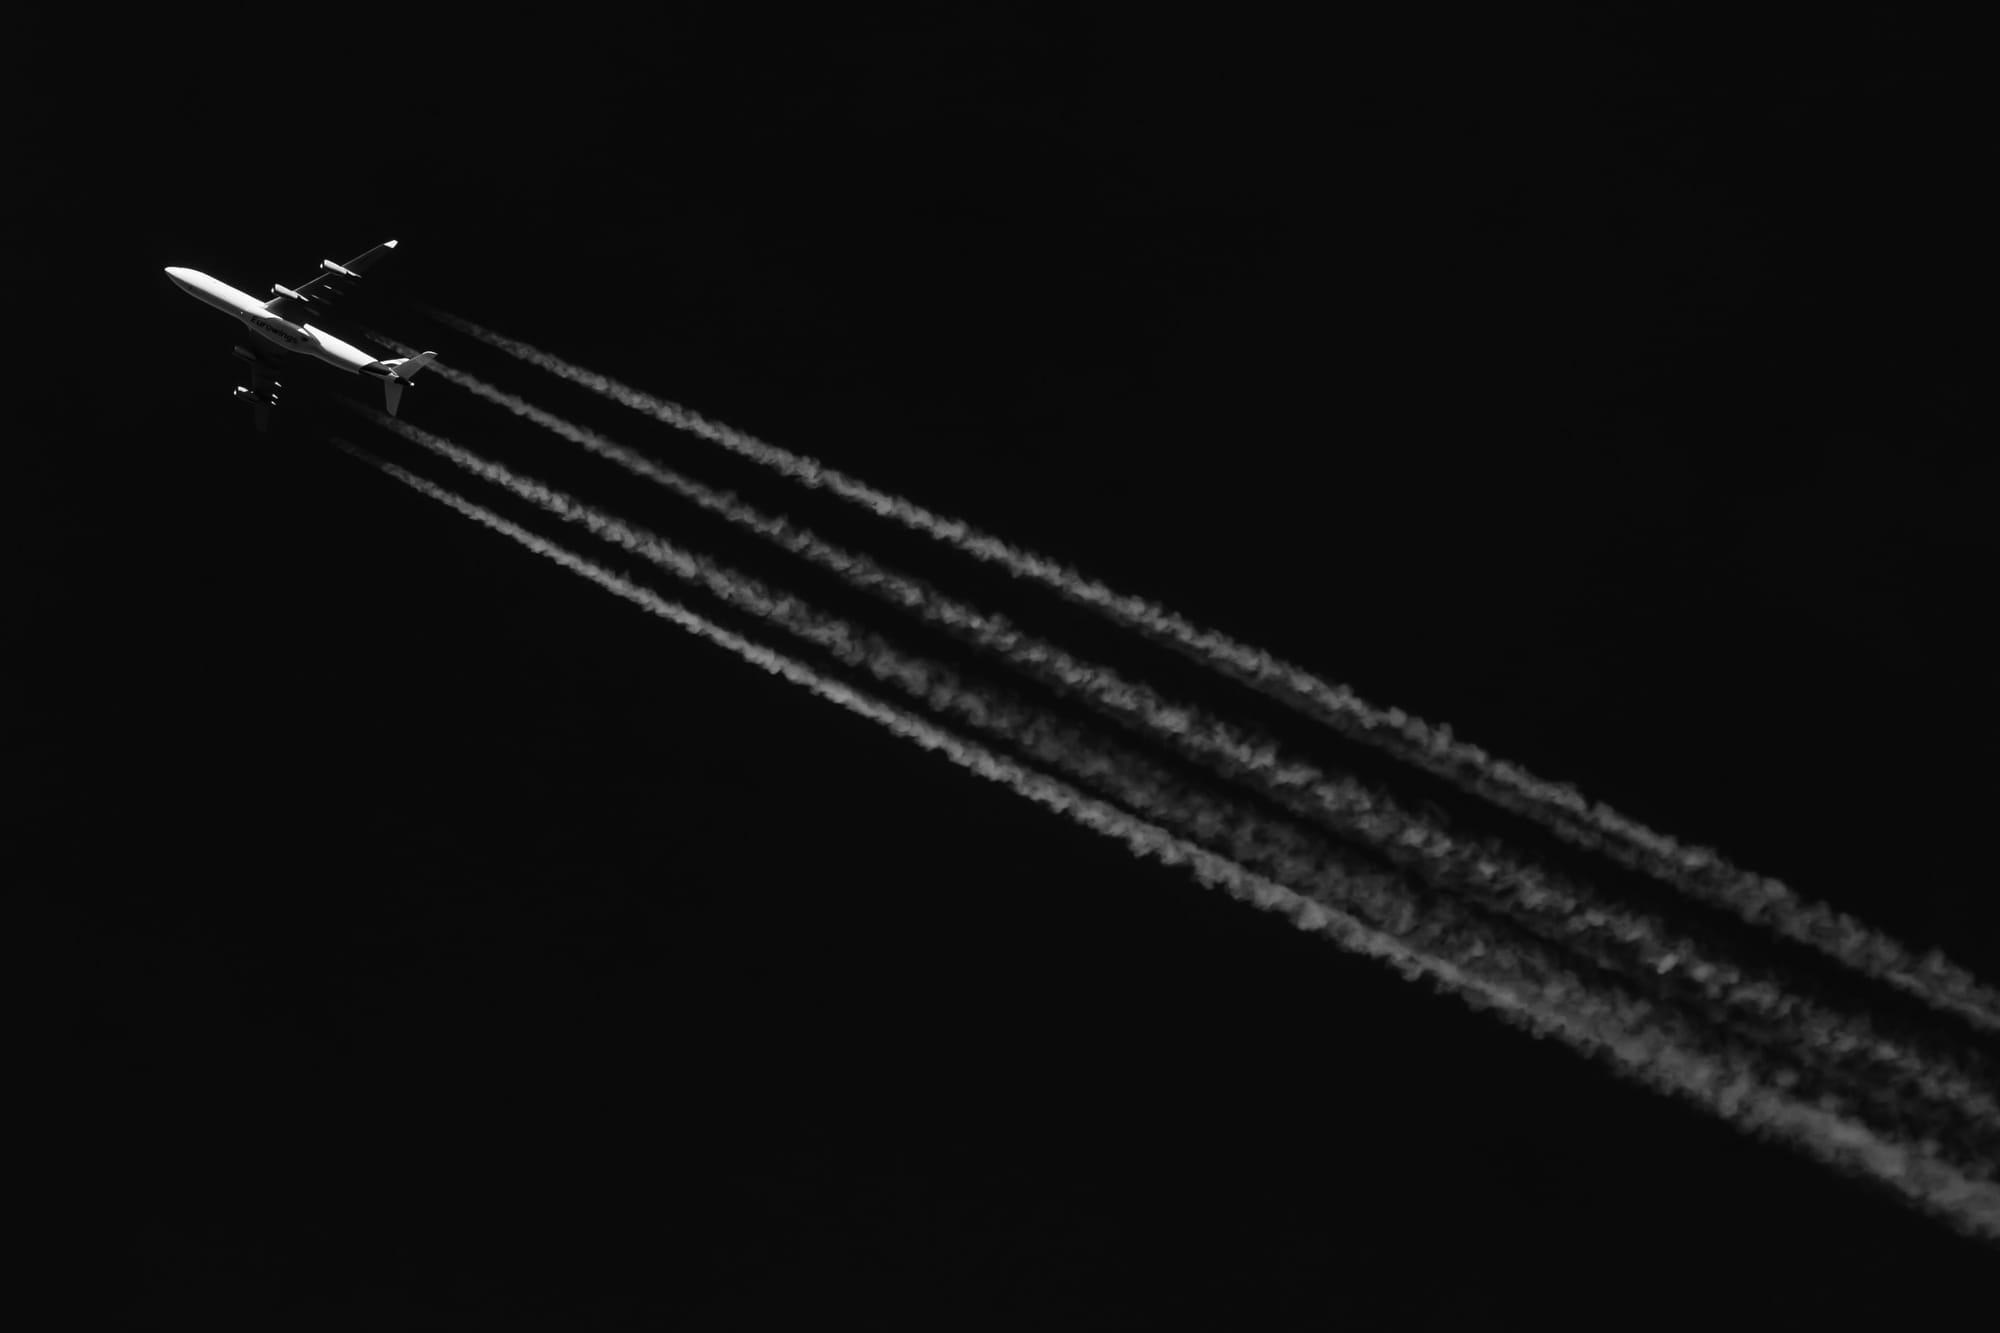 Contrails or Chemtrails? Debunking the Conspiracy Theory